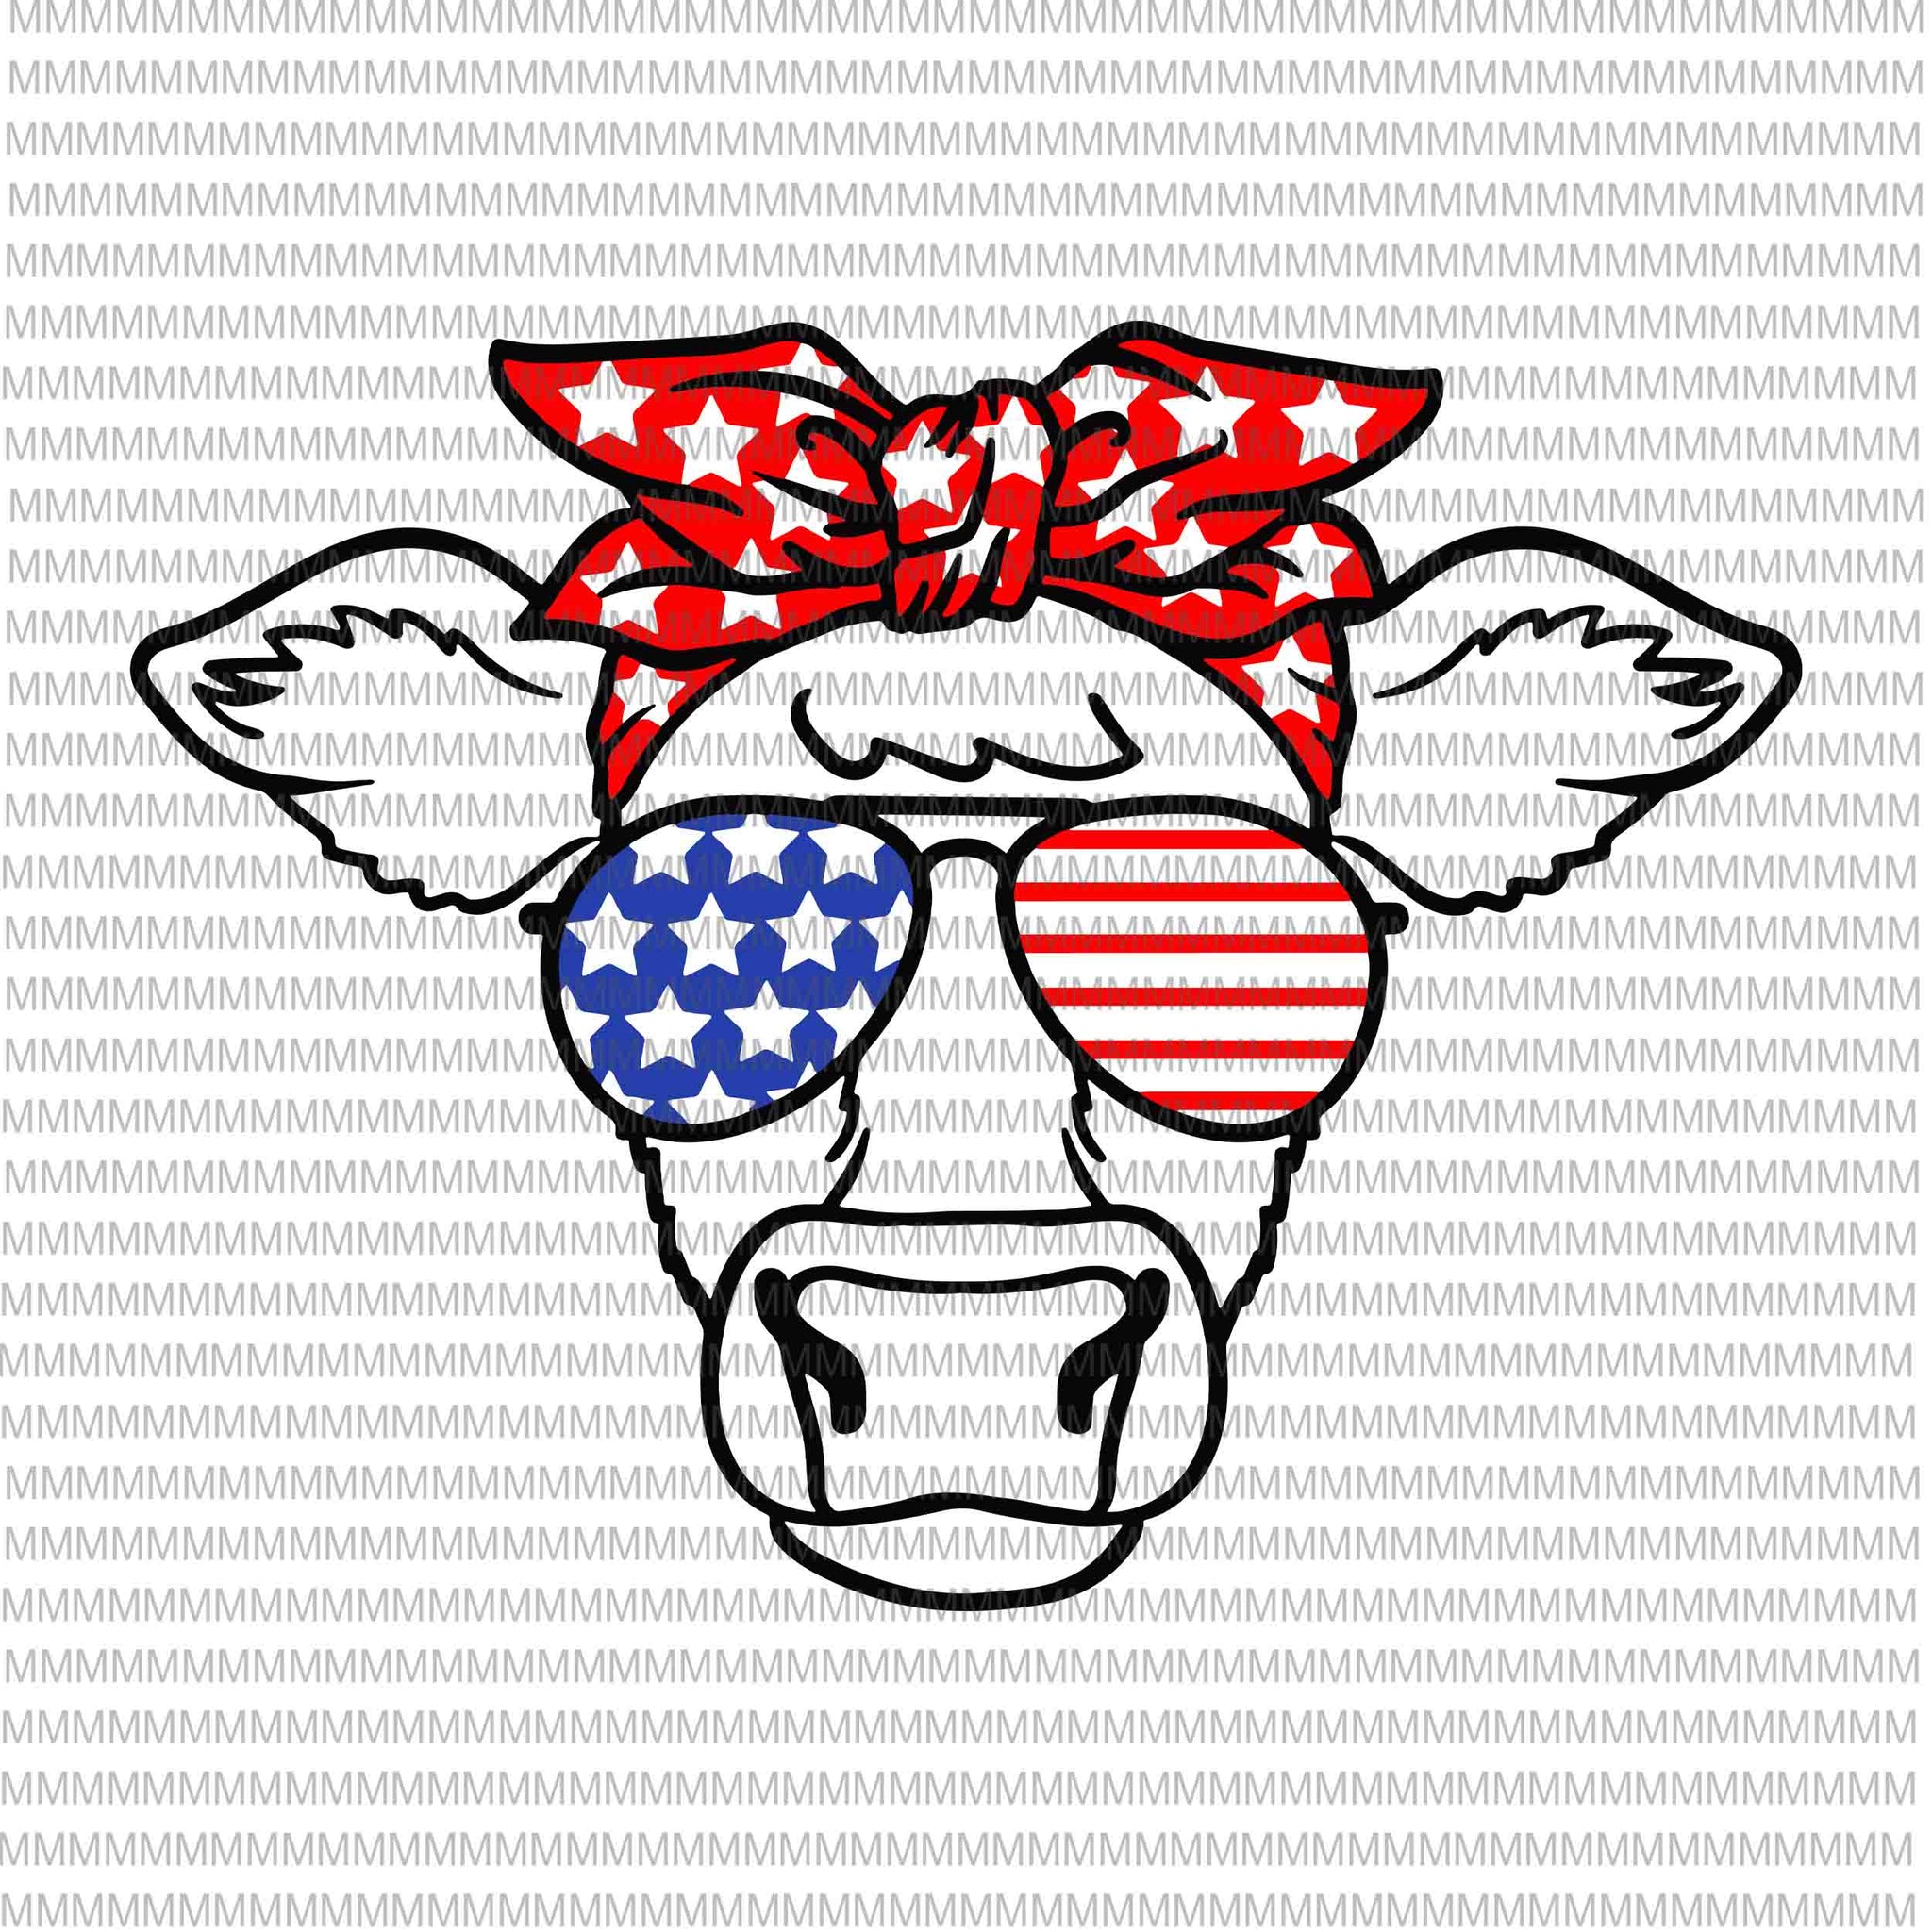 4th of July svg, cow svg, Independence Day svg, American flag svg, patriotic, 4th of July vector, cow 4th of July design, funny 4th of July, Svg Files for Cricut, cut file buy t shirt design artwork